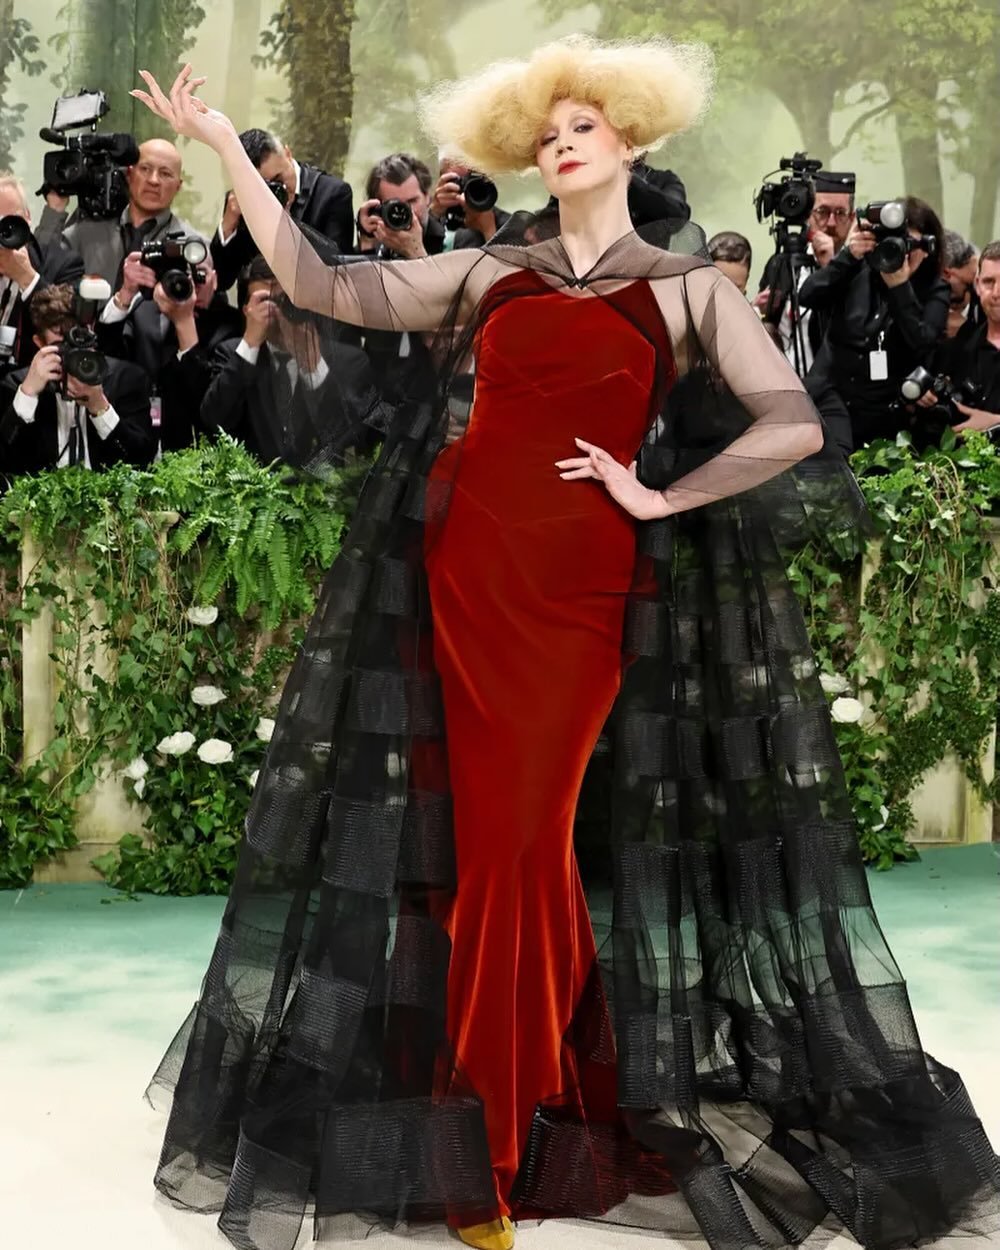 gwendoline christie, i bow before thee #metgala